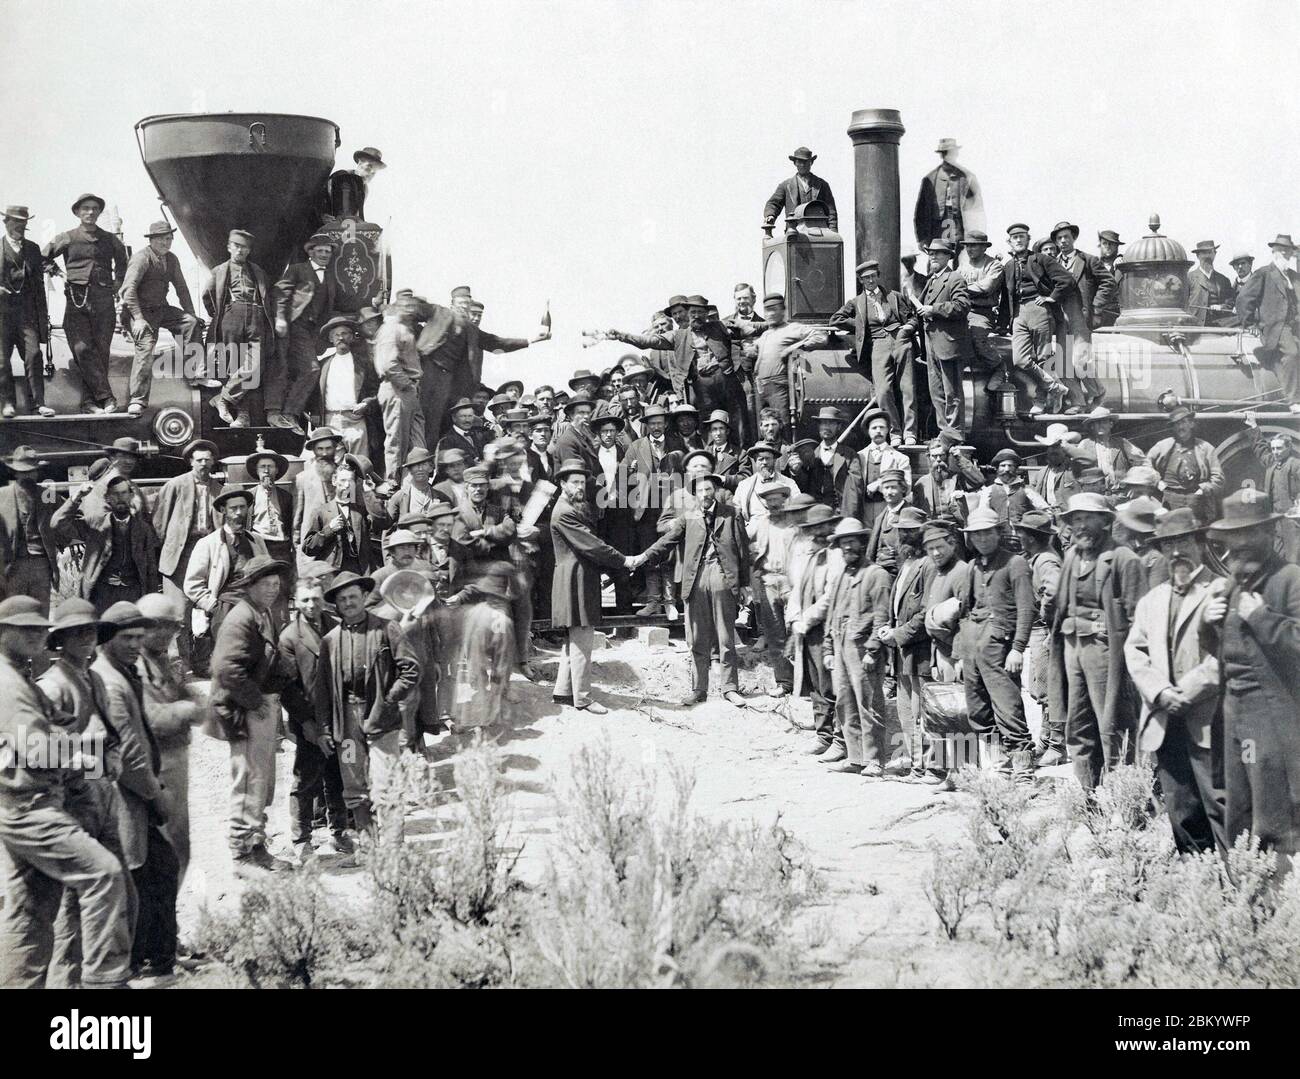 FRST US TRANSCONTINENTAL RAILROAD. Ceremony of driving the 'Last Spike' at Promontory Summit, Utah, 10 May 1869. Stock Photo